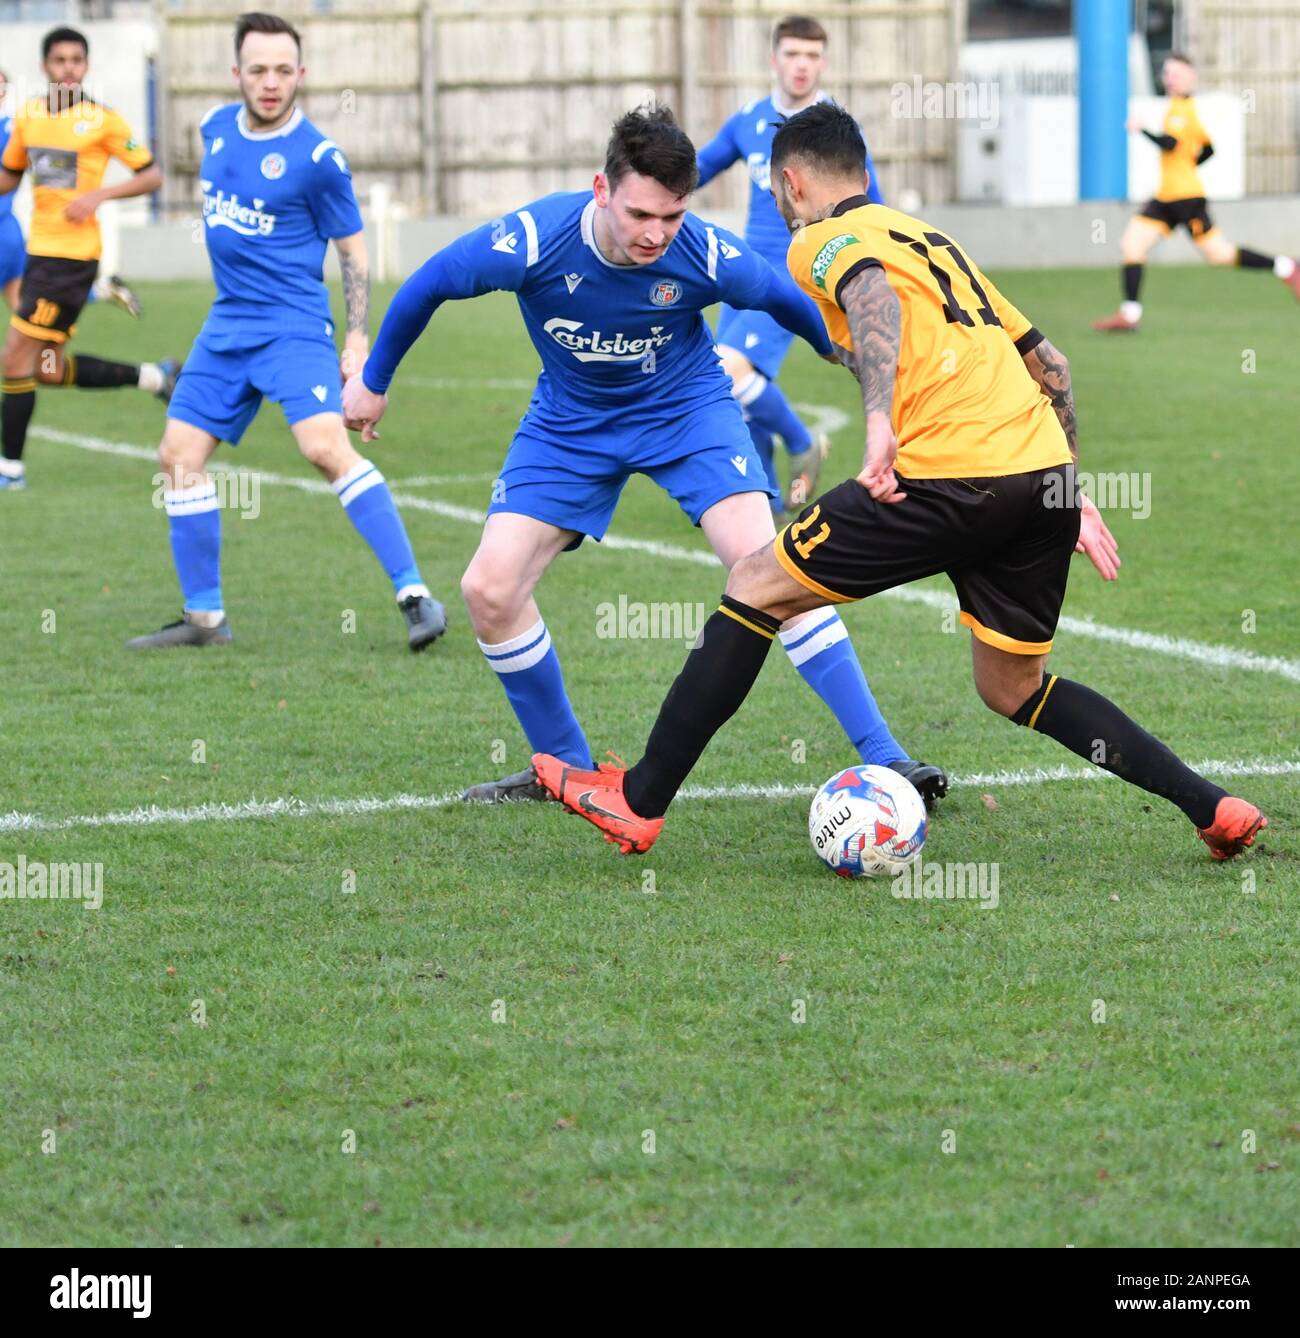 New Mills, Derbyshire  January 18th 2020 Action from the North West Counties League match between New Mills (amber and black)  and Wythenshawe Town (blue).Wythenshawe win 4-2. Stock Photo